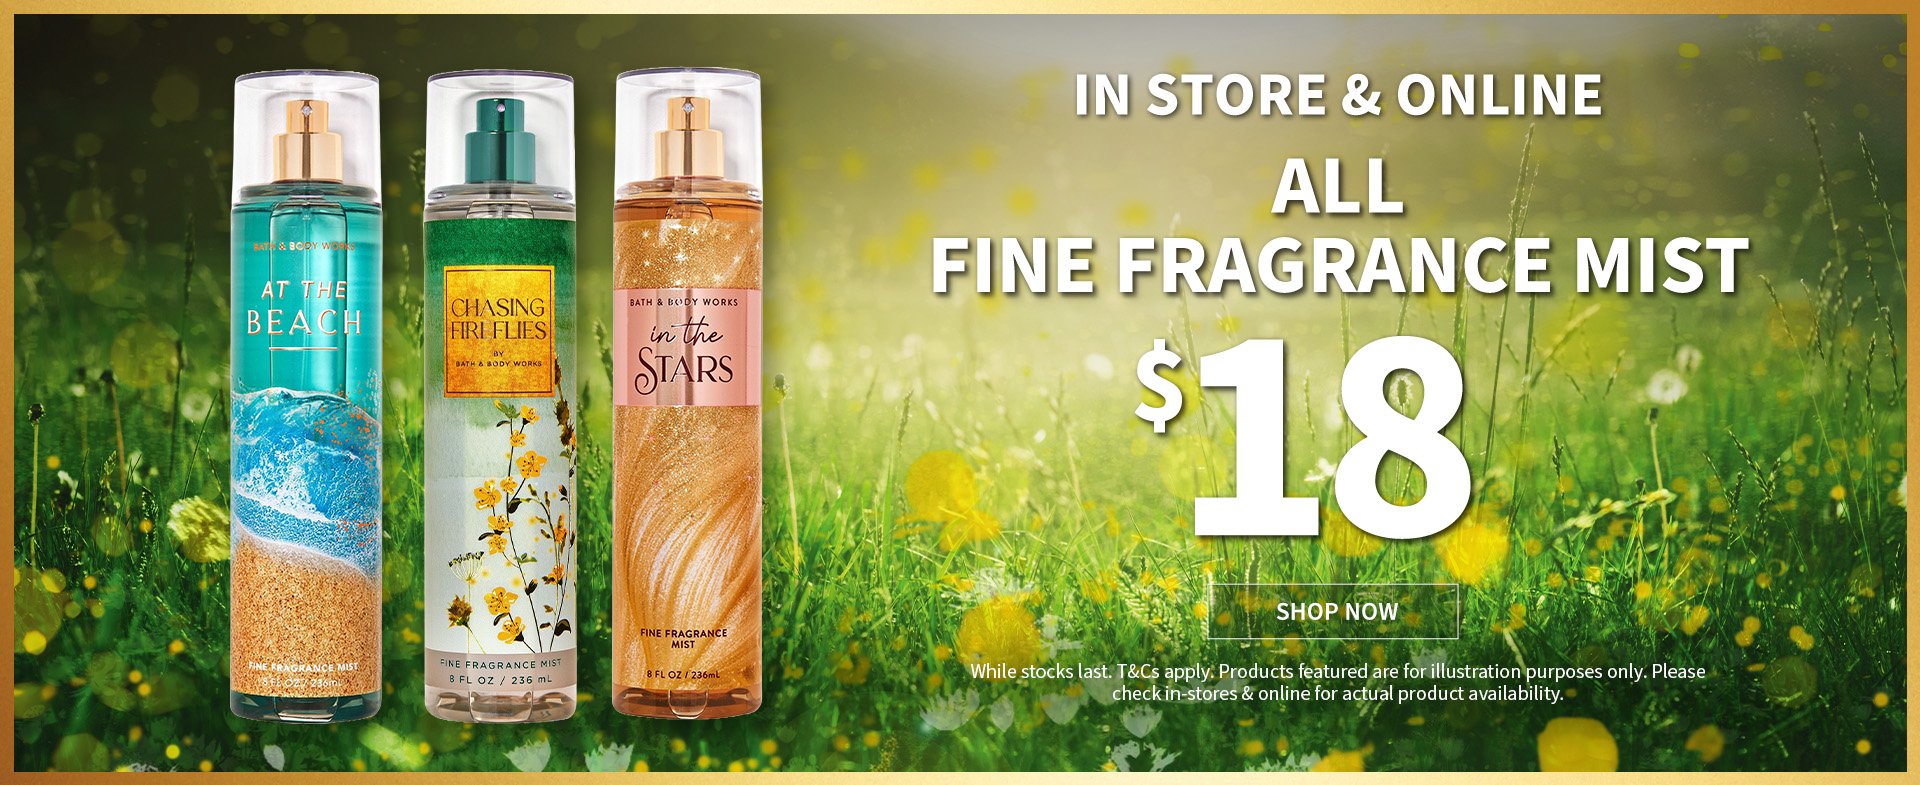 IN STORE and ONLINE ALL FINE FRAGRRANCE MIST $$